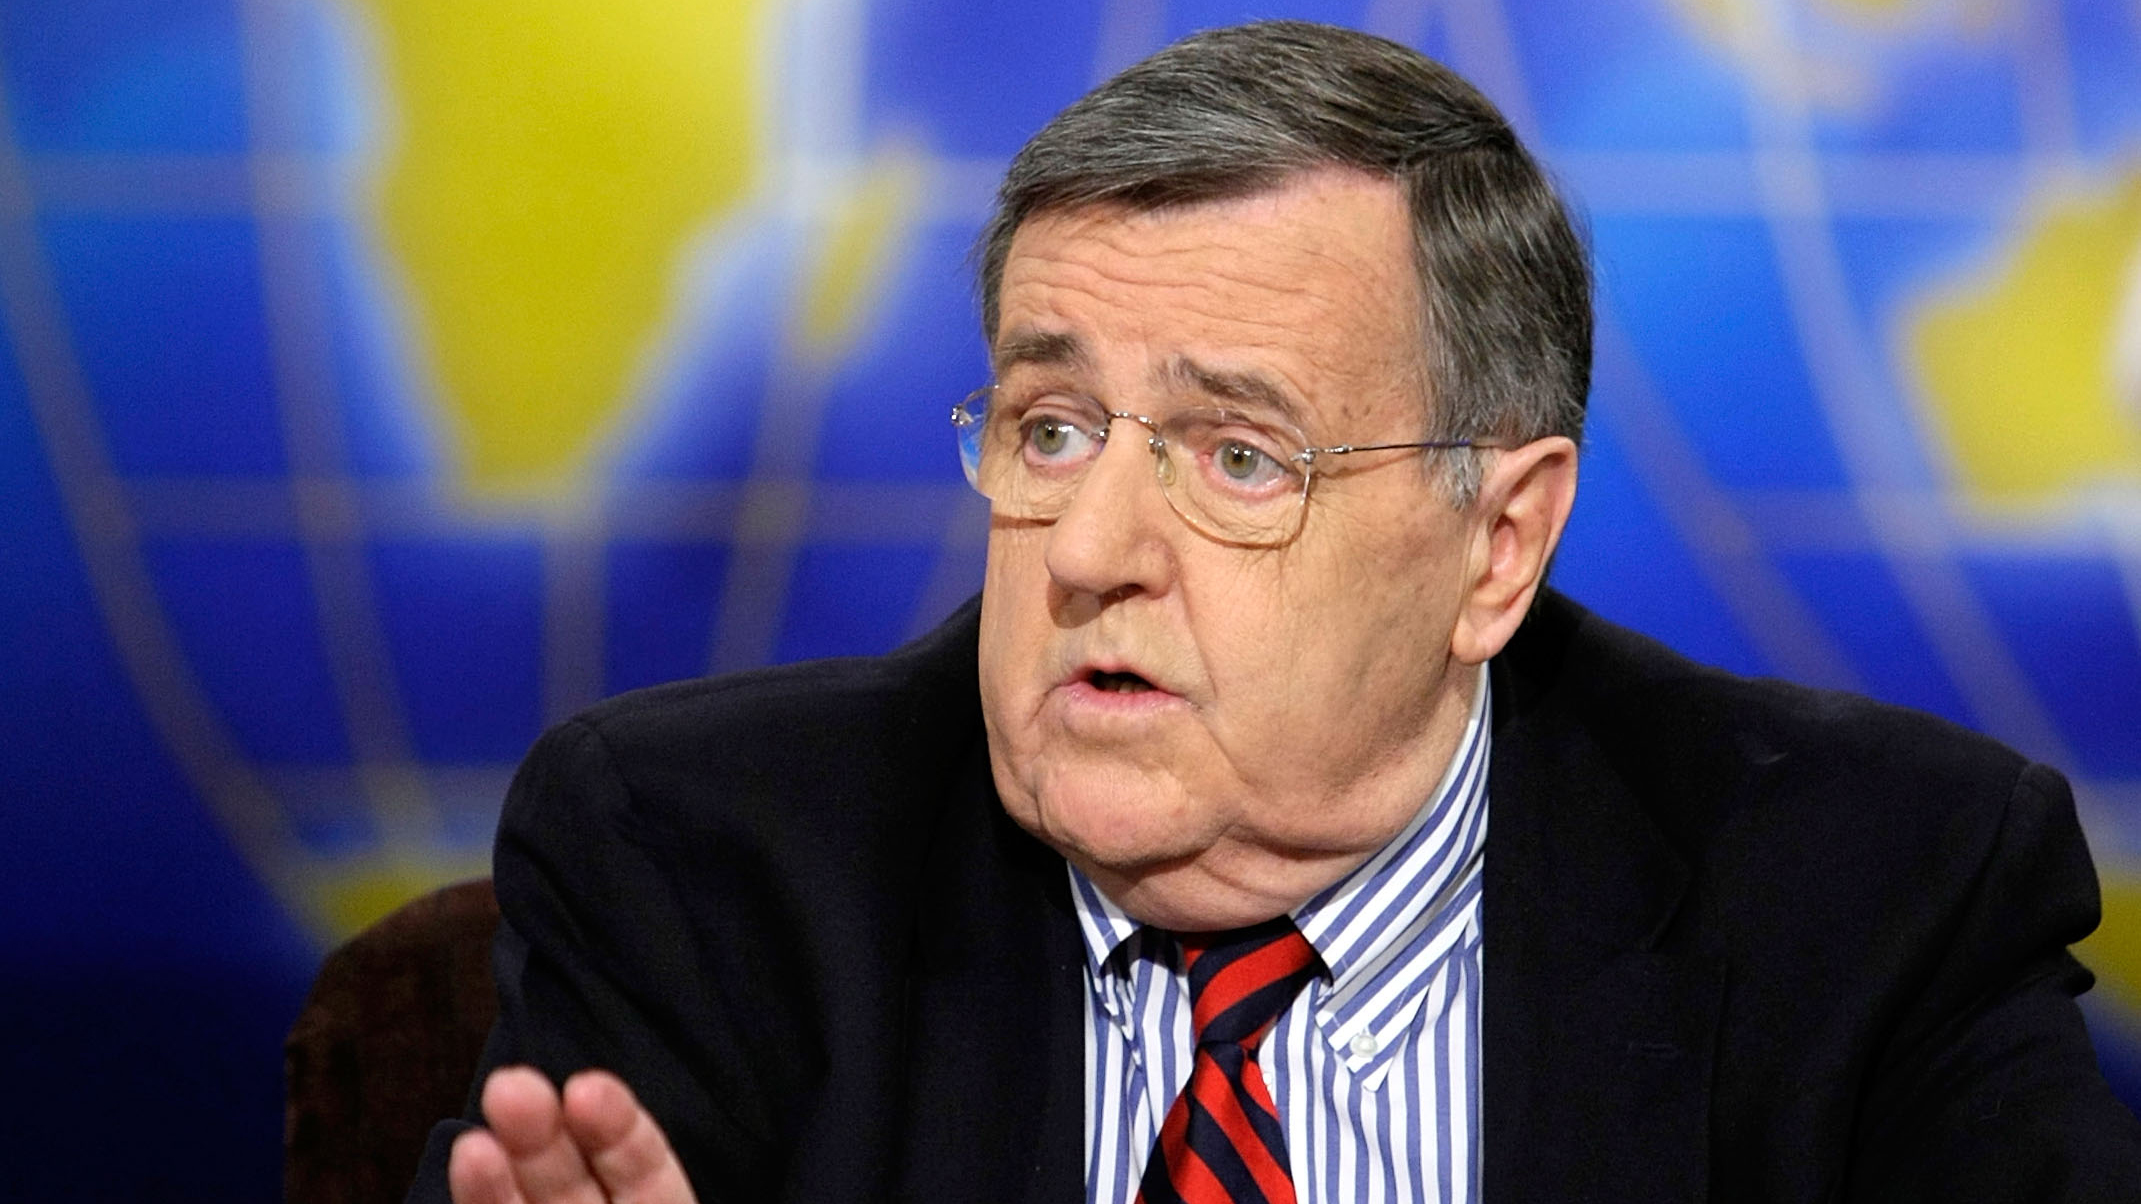 Mark Shields, Political Analyst On CNN And PBS ‘NewsHour’, Has Died At 85